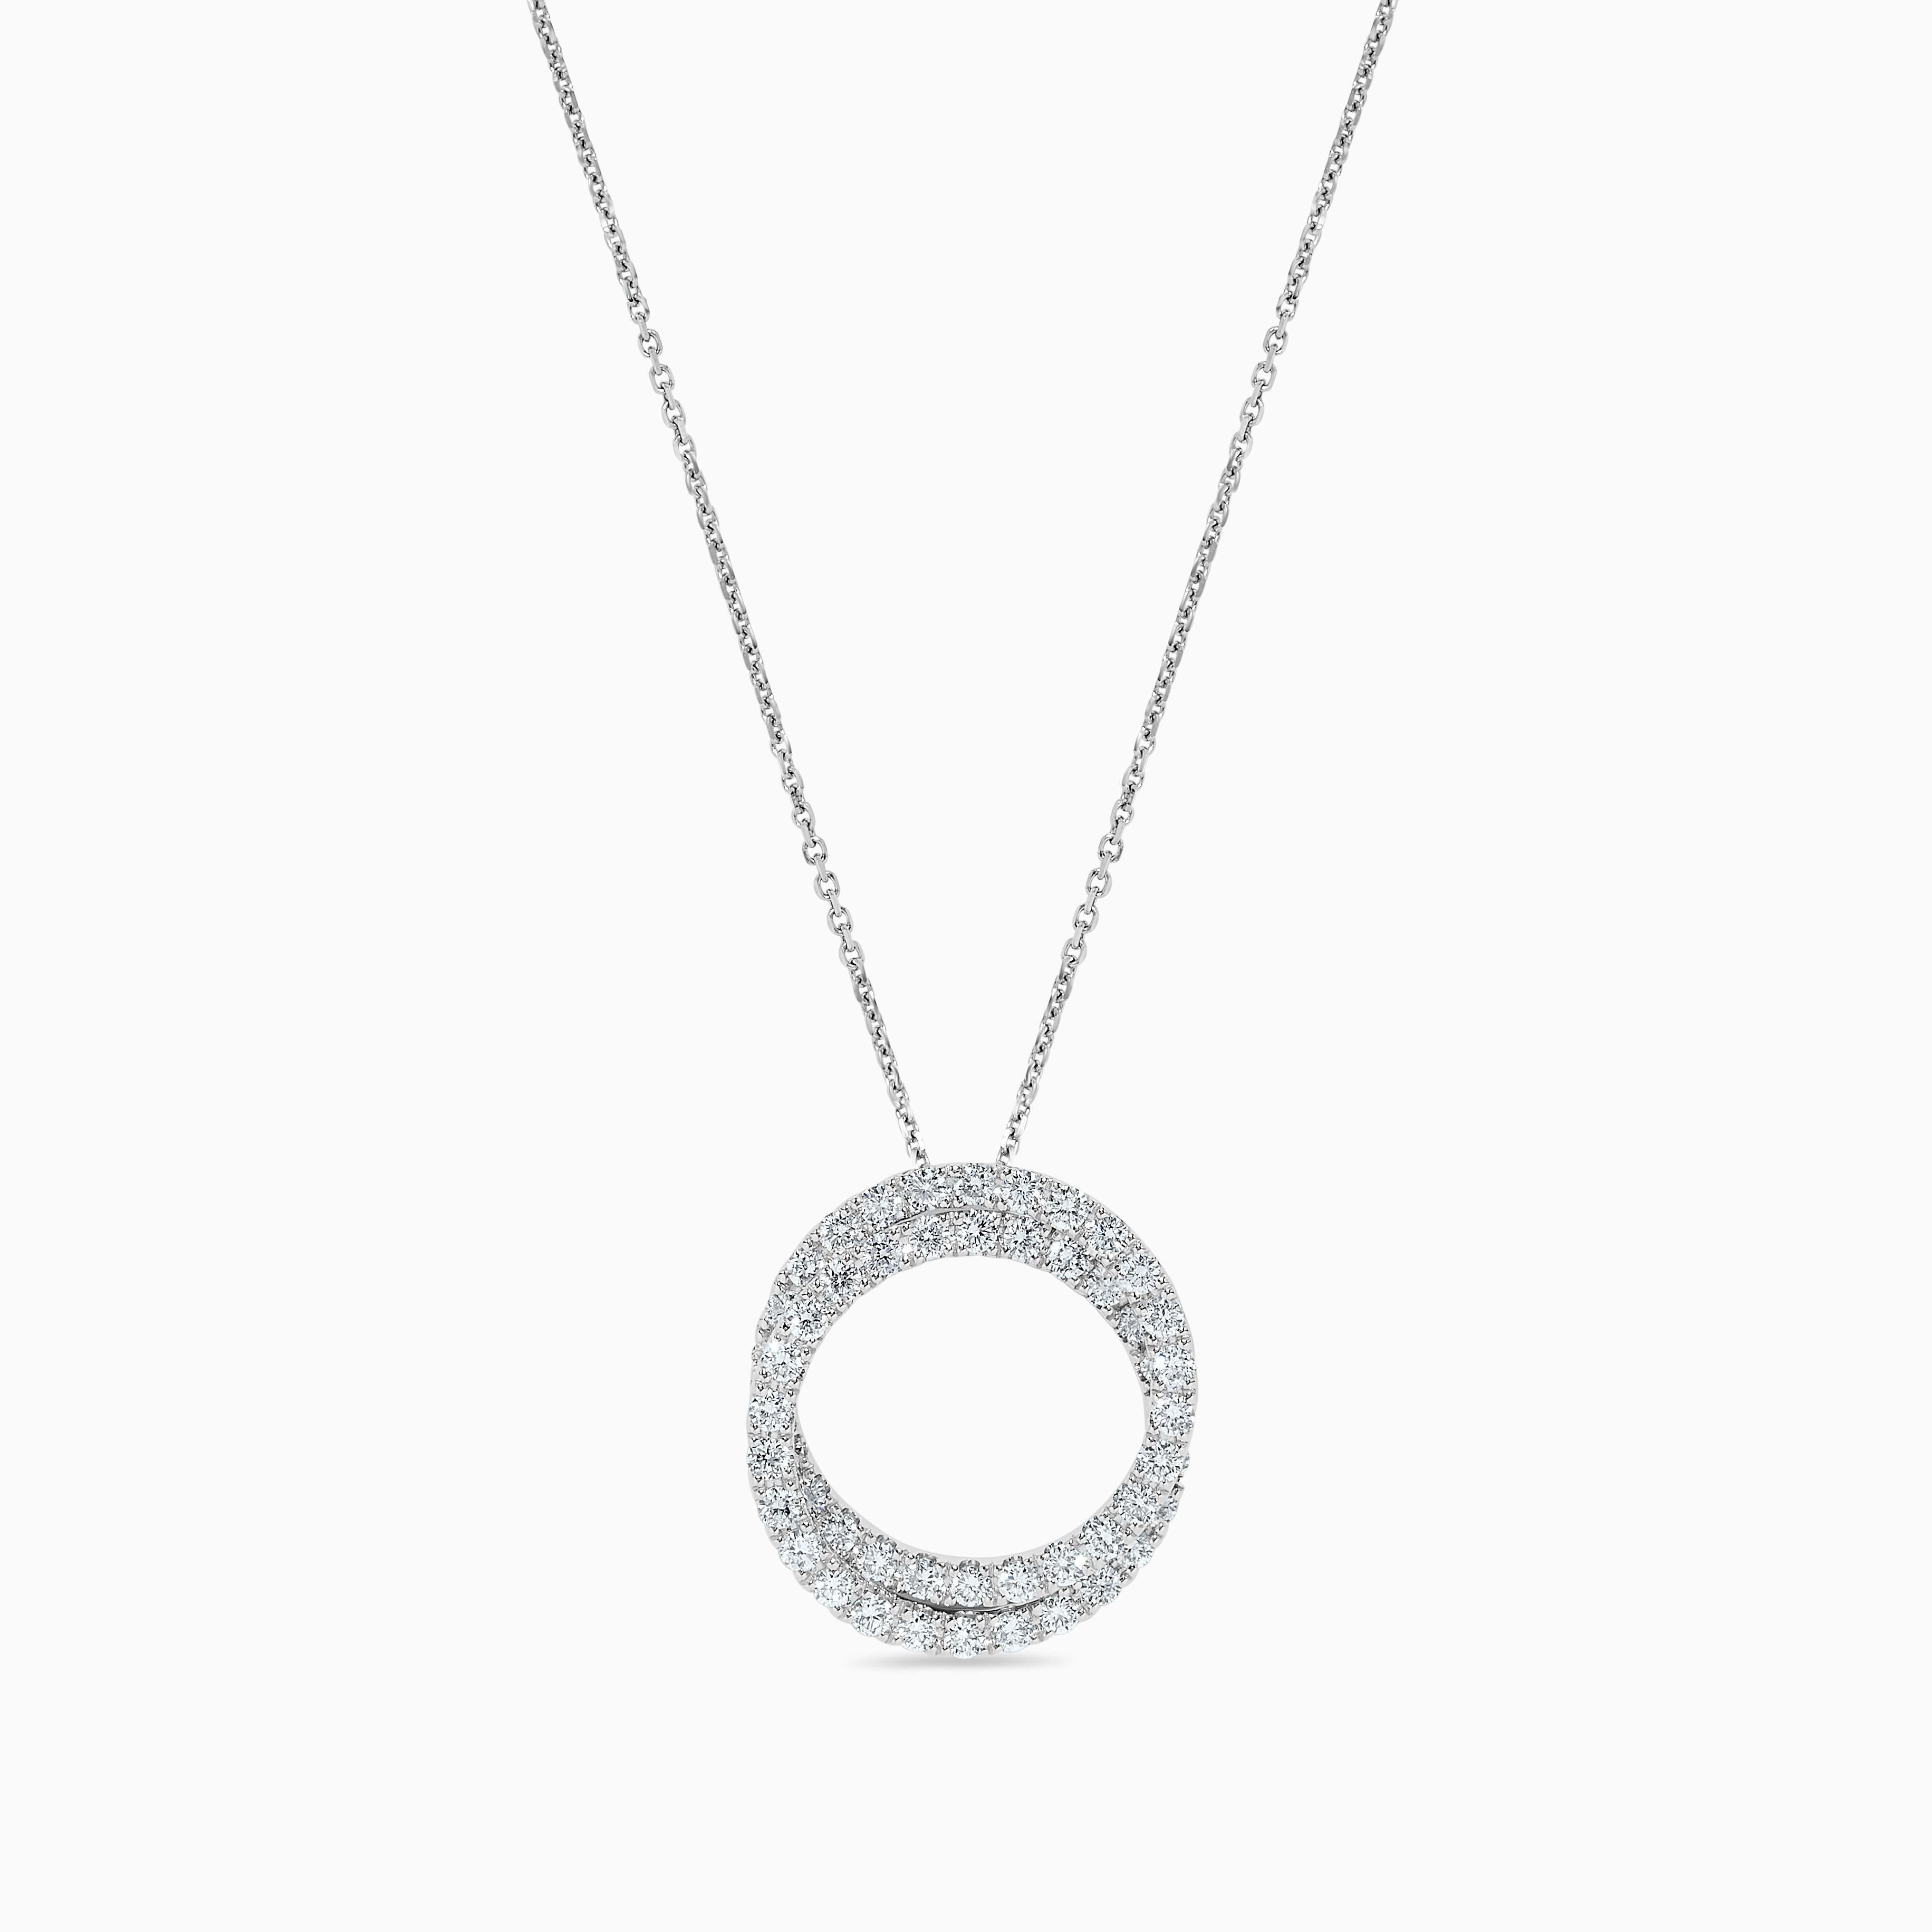 RareGemWorld's classic diamond pendant. Mounted in a beautiful 18K White Gold setting with natural round white diamond melee. This pendant is guaranteed to impress and enhance your personal collection.

Total Weight: 1.20cts

Length x Width: 22.3 x